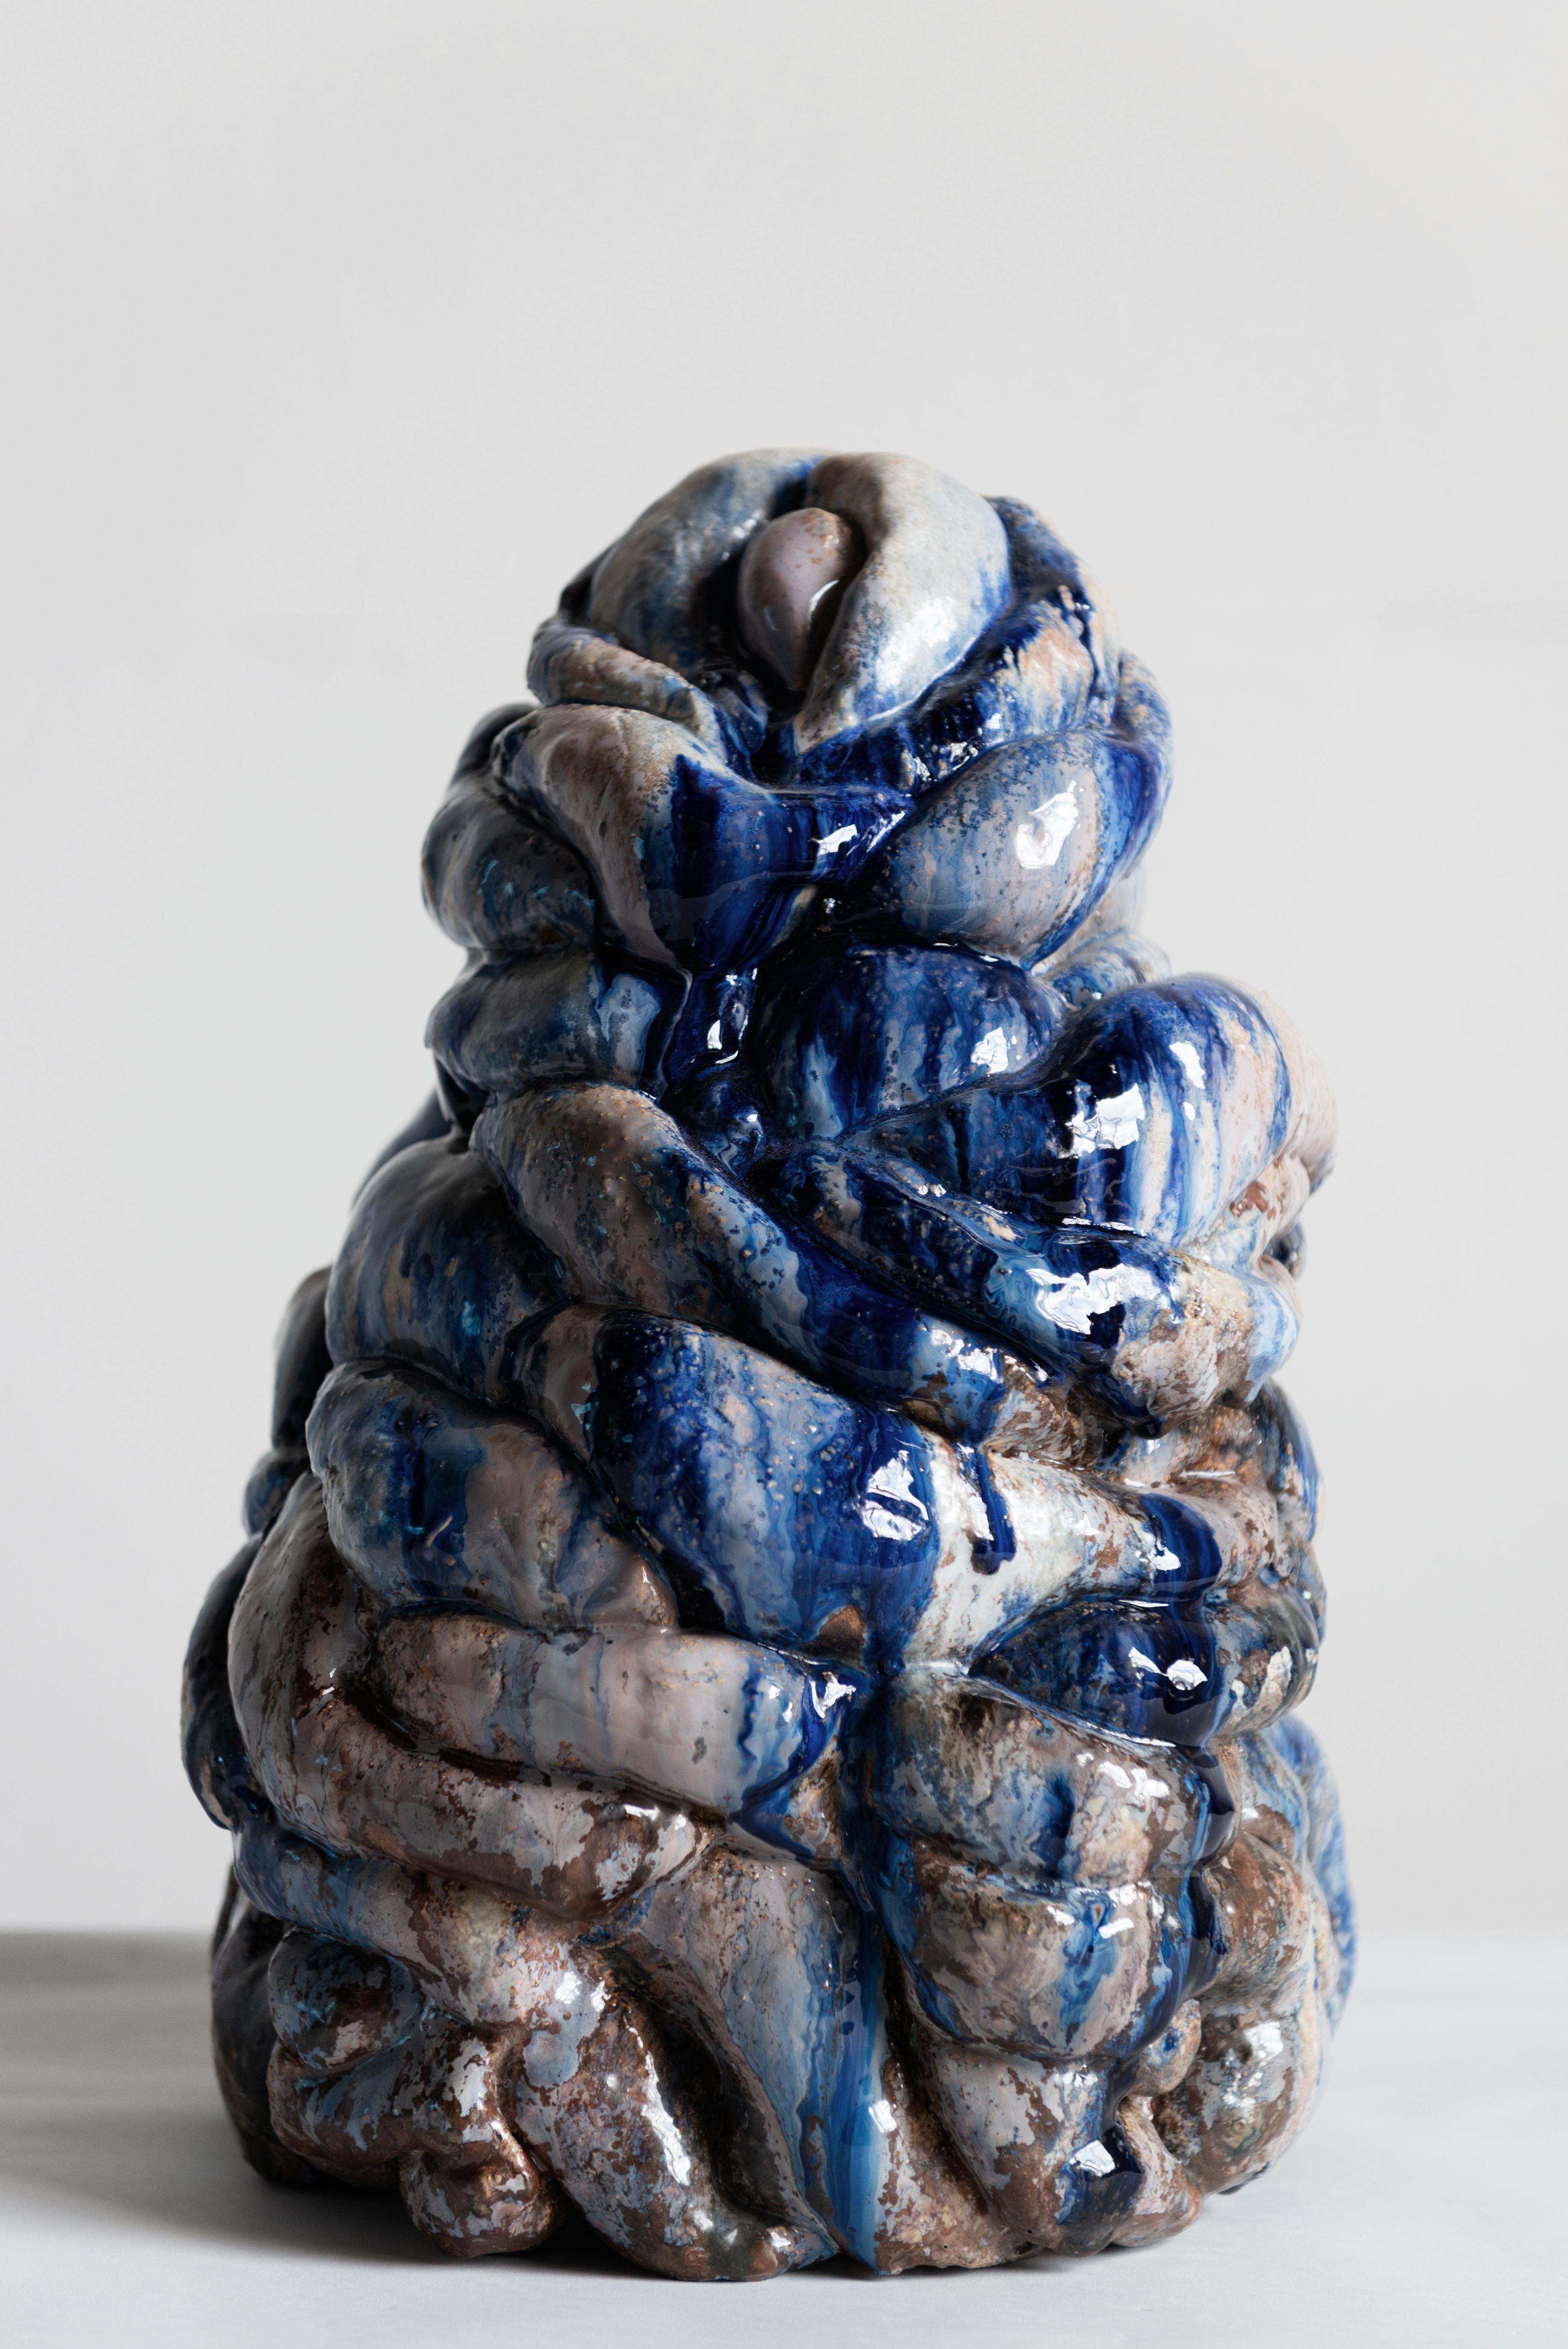 Plastic blue sculpture by Natasja Alers, 2019
Dimensions: 44 x 28 x 24 cm
Material: ceramics, glazes.

Visual artist Natasja Alers (The Hague, 1987) graduated from the Gerrit Rietveld Academy in the field of ceramics. Alers makes casts of human